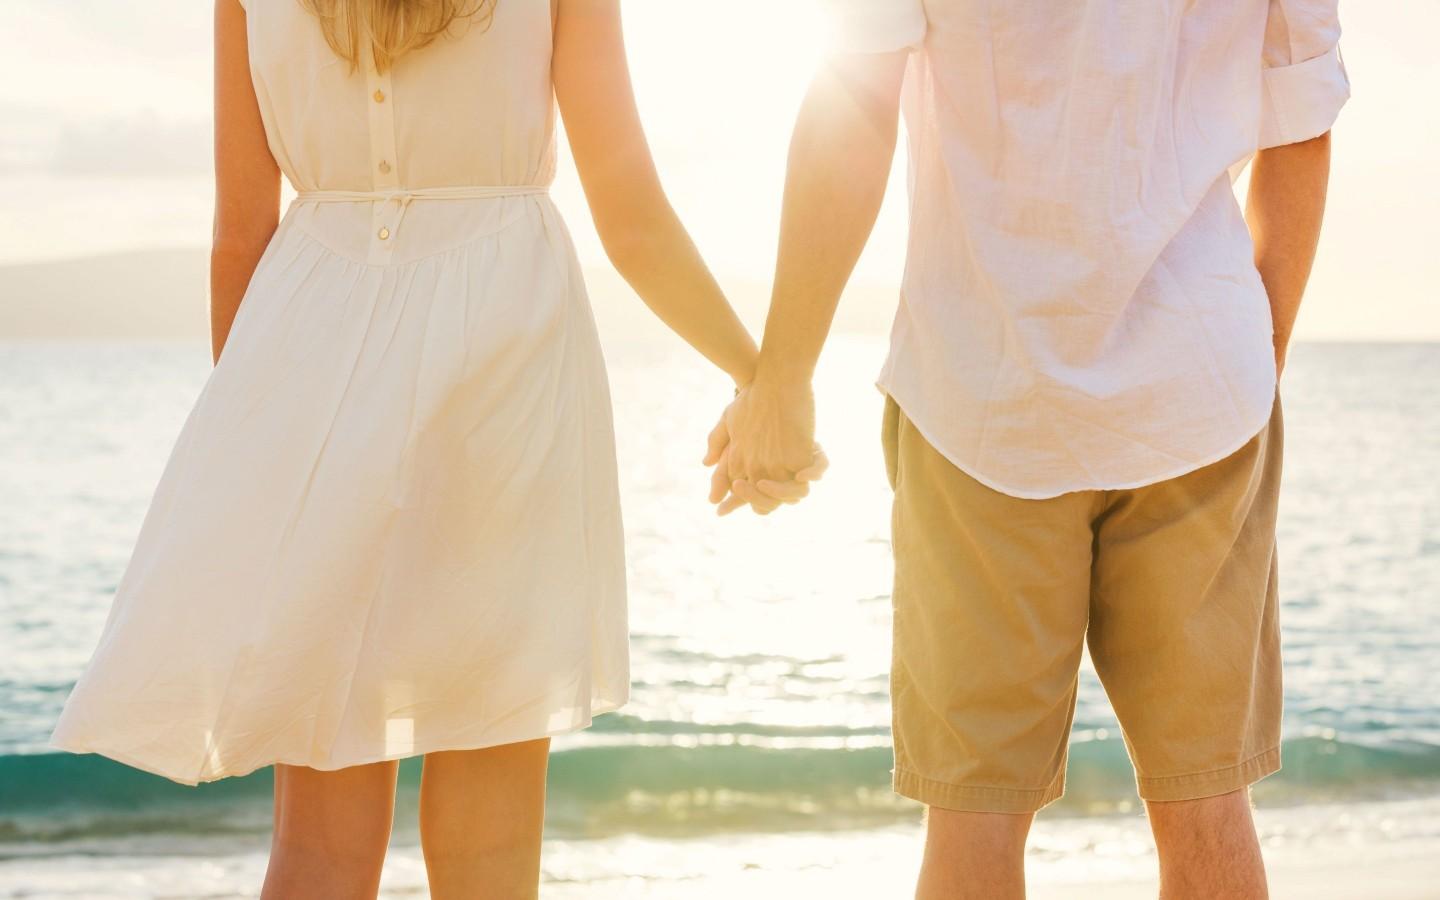 Boy and Girl Holding Hands on the Beach widescreen wallpaper. Wide